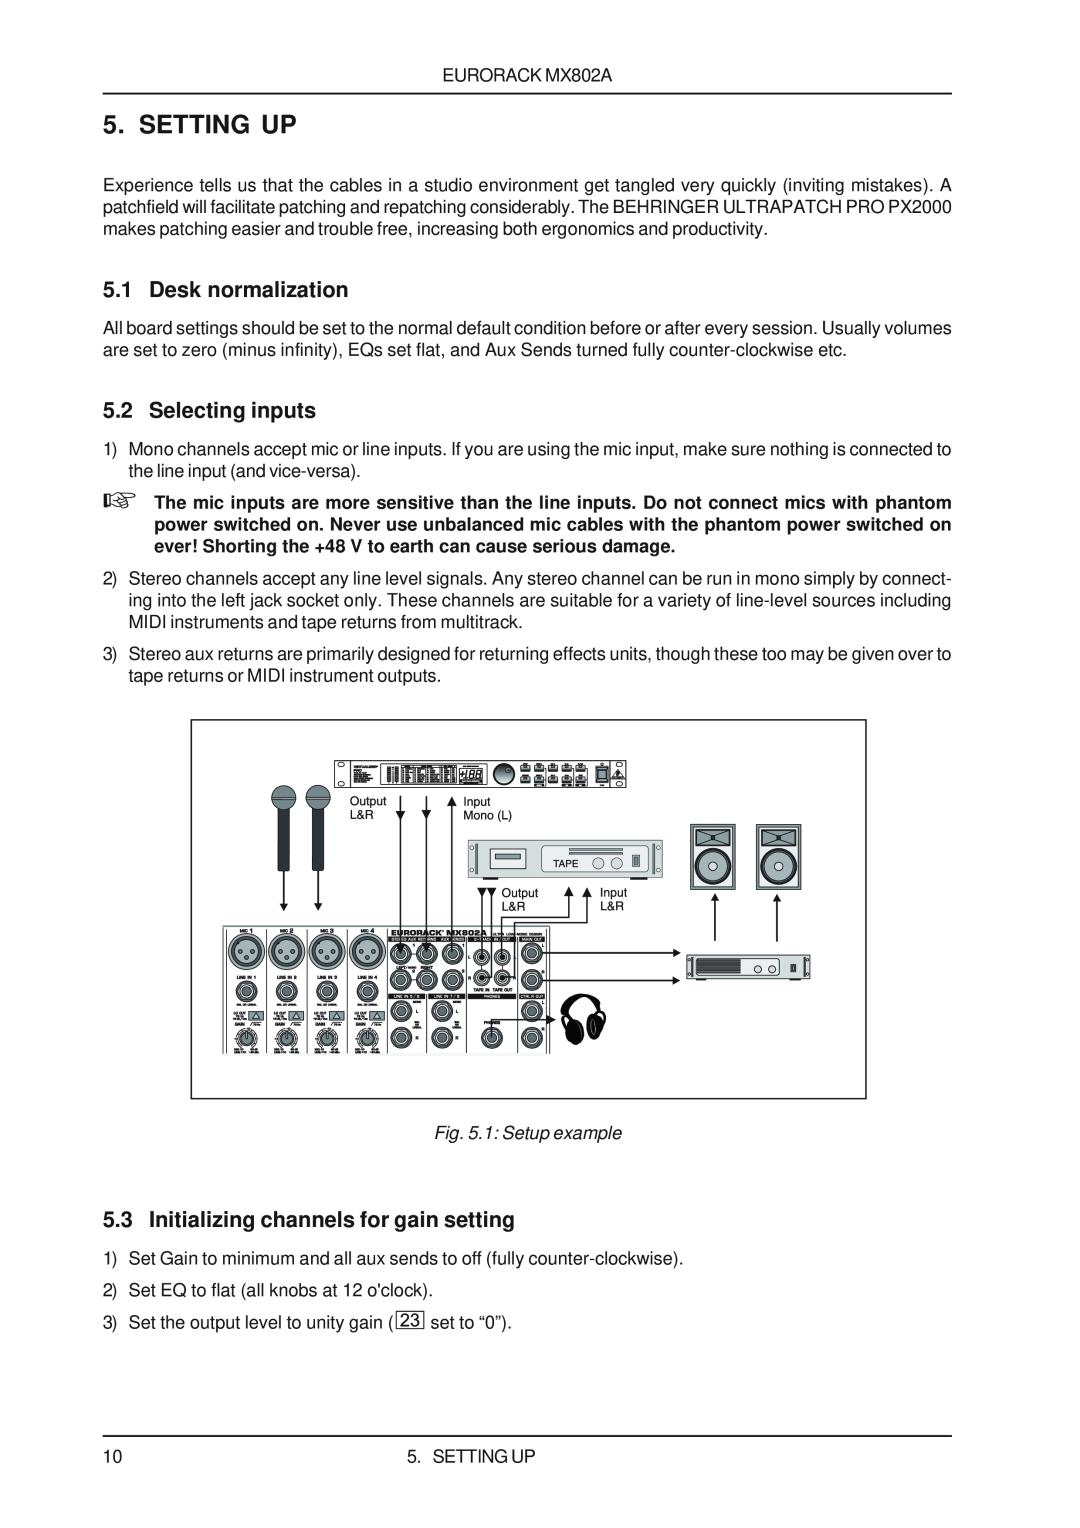 Behringer MX802A Setting Up, Desk normalization, Selecting inputs, Initializing channels for gain setting, 1 Setup example 